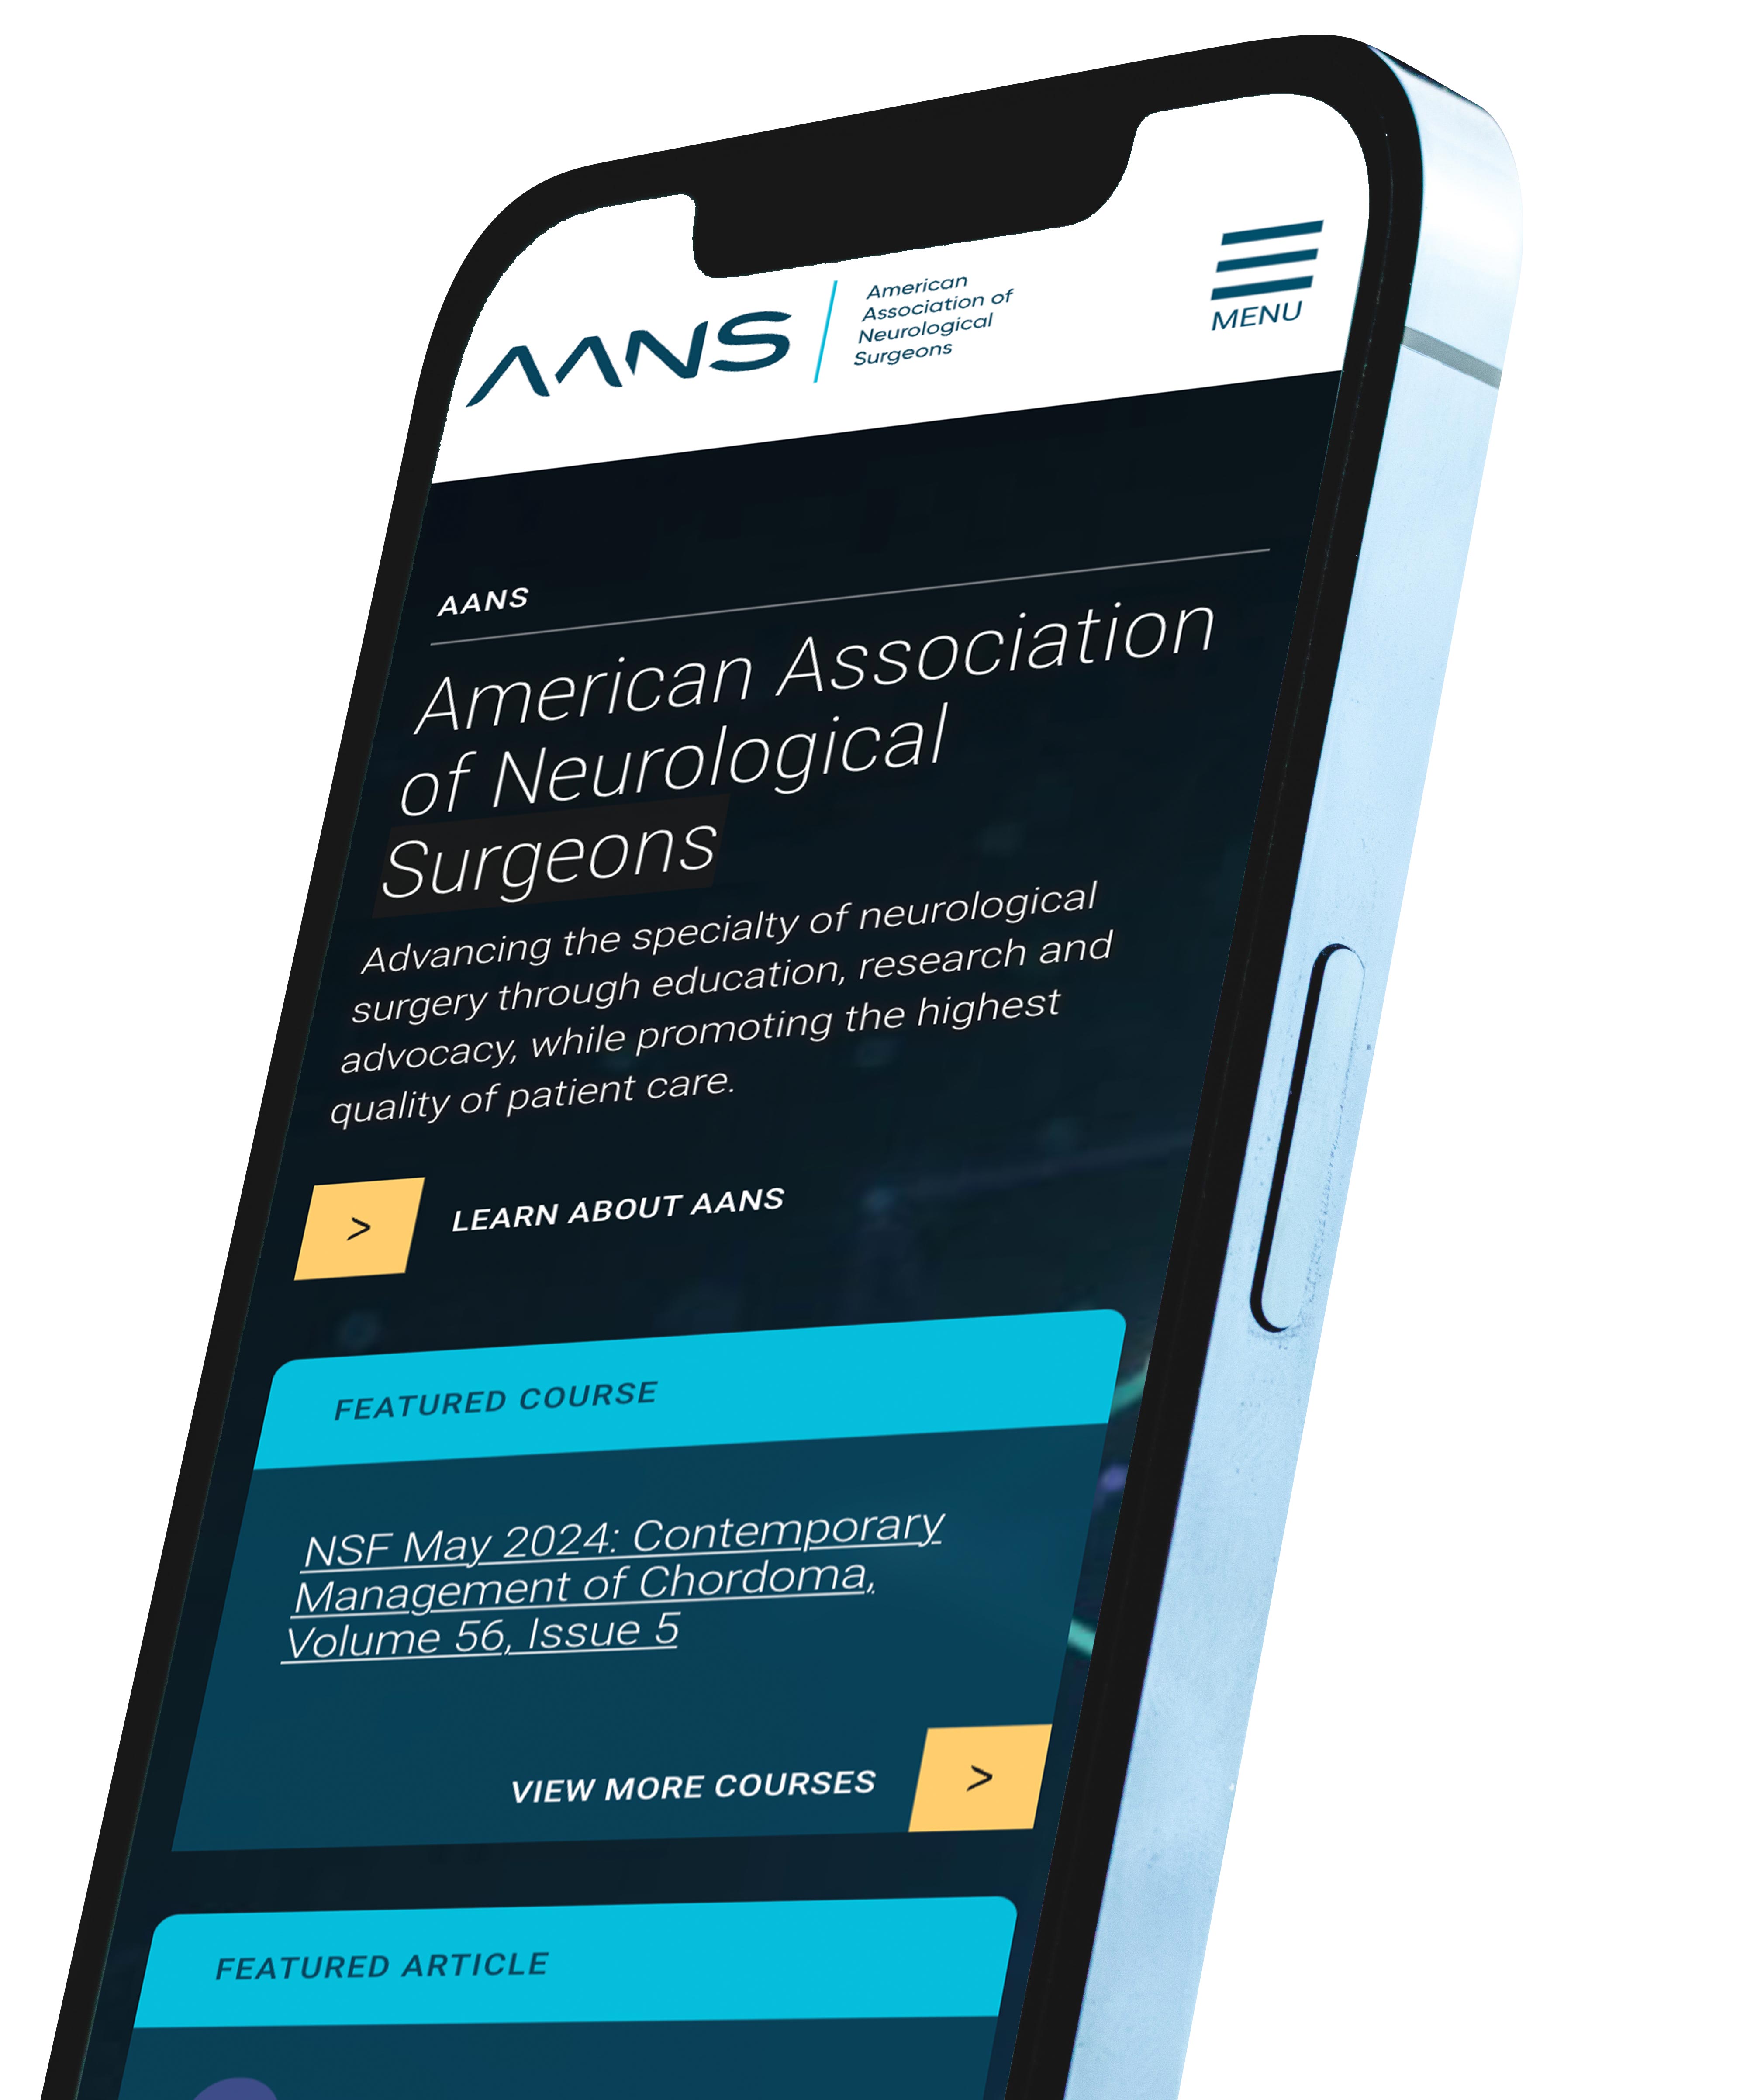 AANS homepage displayed on a mobile phone with dark and blue colors.